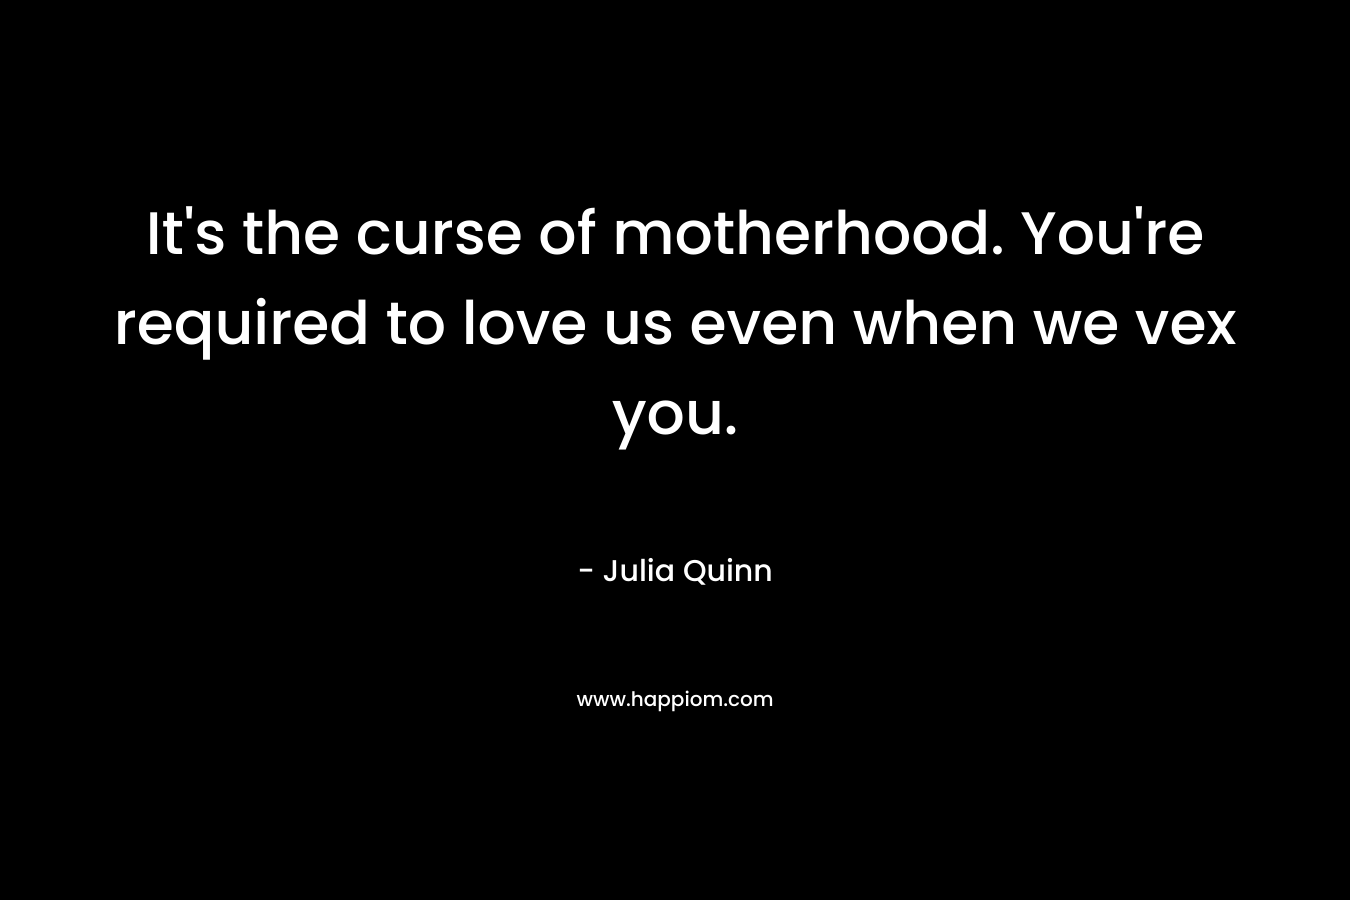 It's the curse of motherhood. You're required to love us even when we vex you.